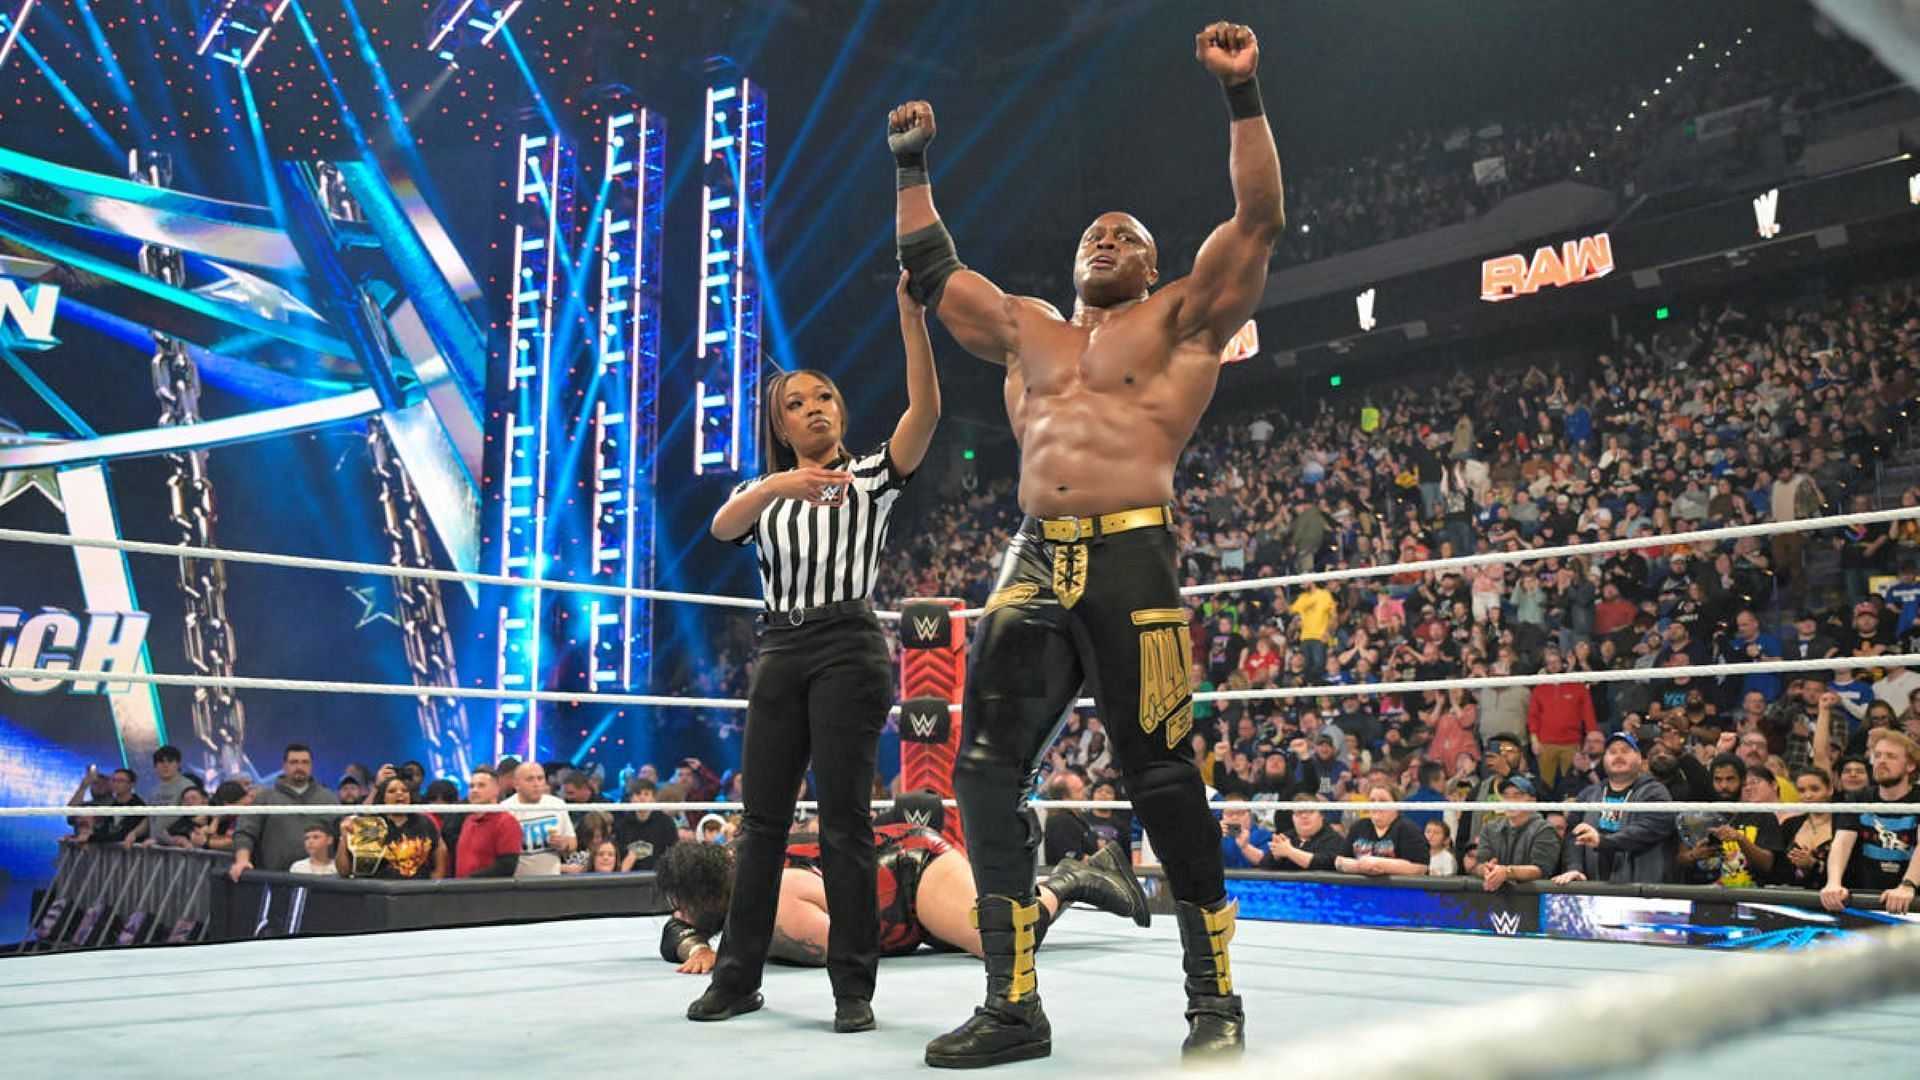 Will Bobby Lashley have his hands raised in Perth next weekend?